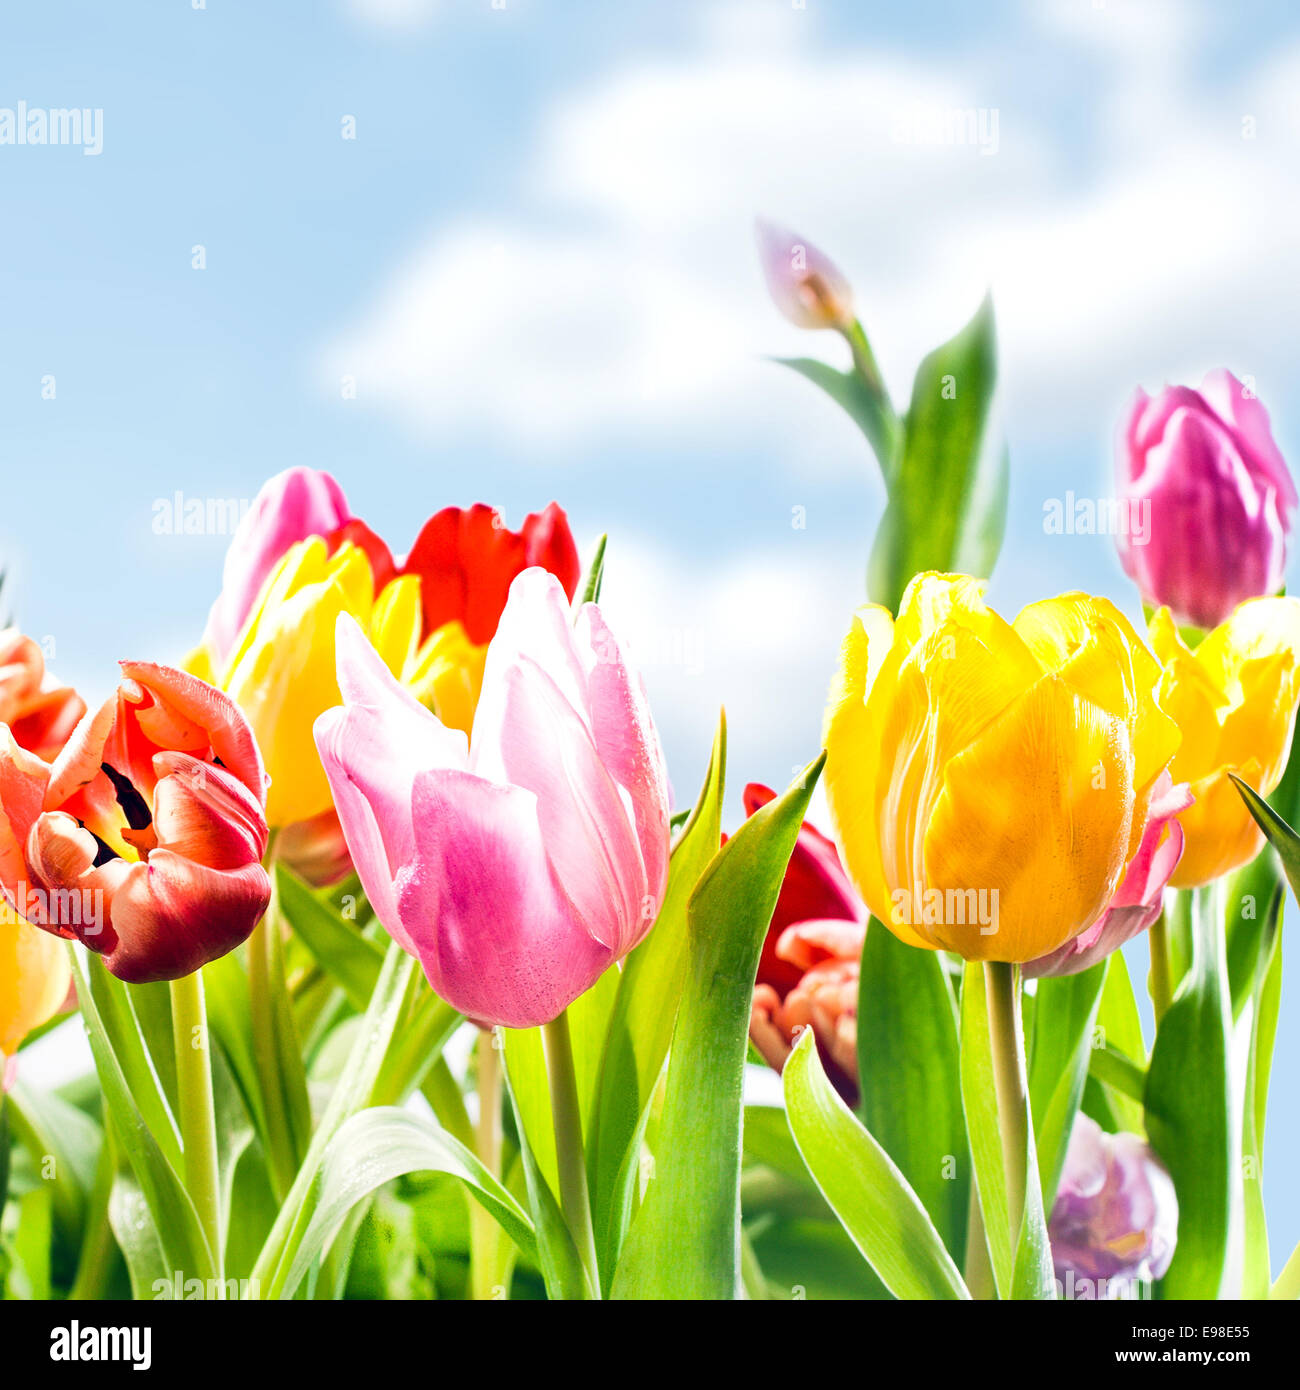 Fresh spring background of vibrant tulips in yellow, red and pink growing outdoors under a sunny blue sky, closeup view in square format Stock Photo